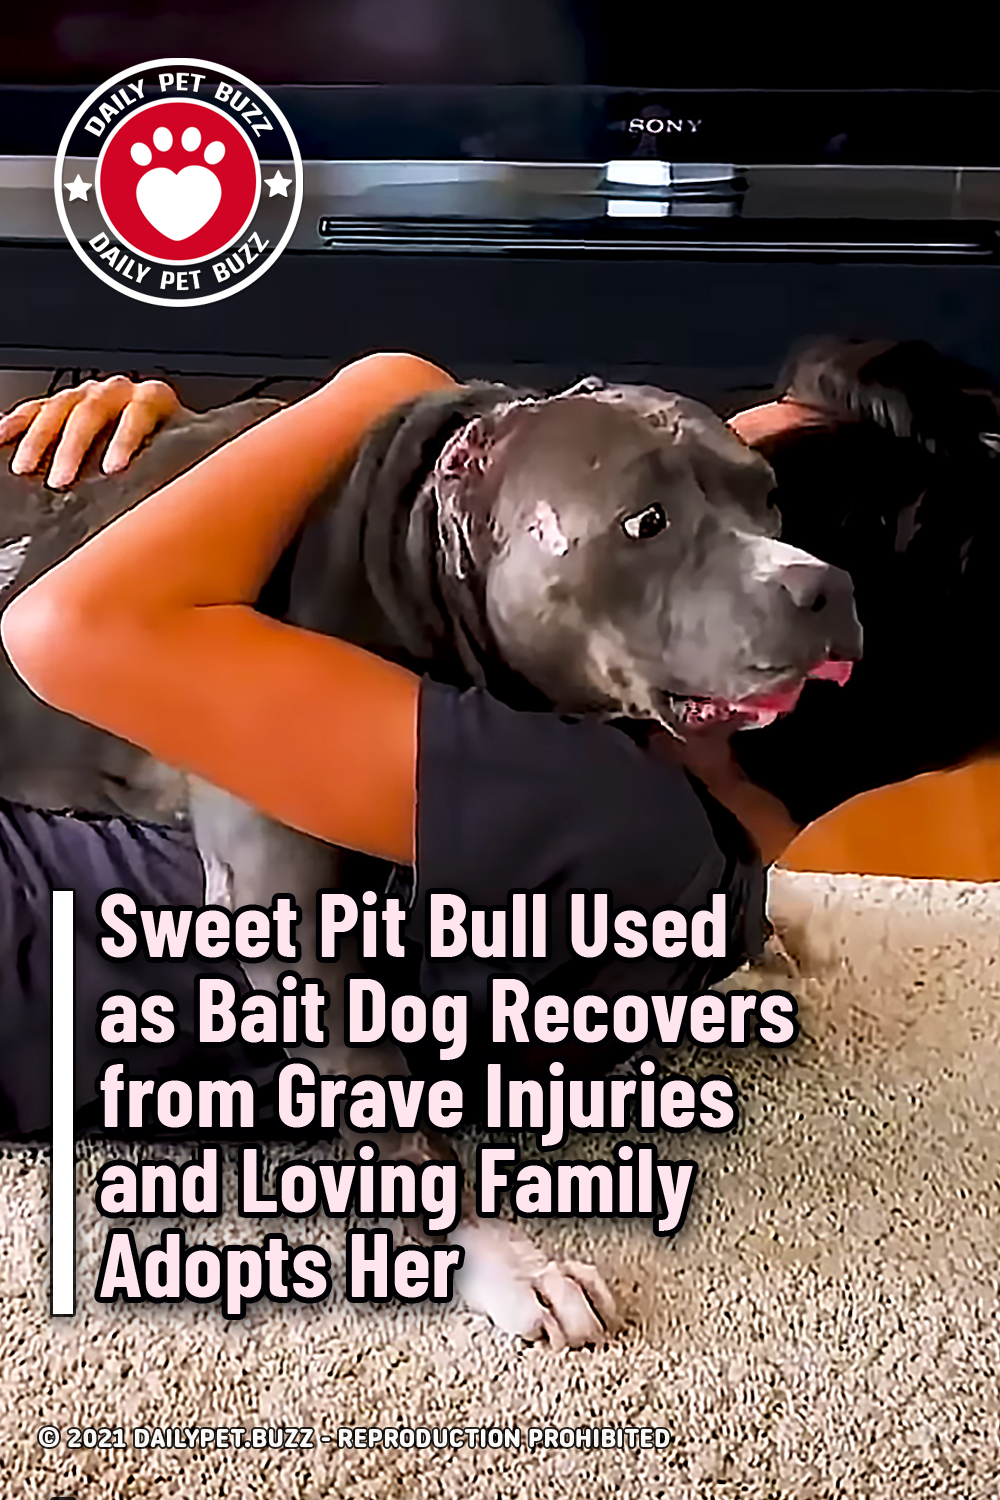 Sweet Pit Bull Used as Bait Dog Recovers from Grave Injuries and Loving Family Adopts Her